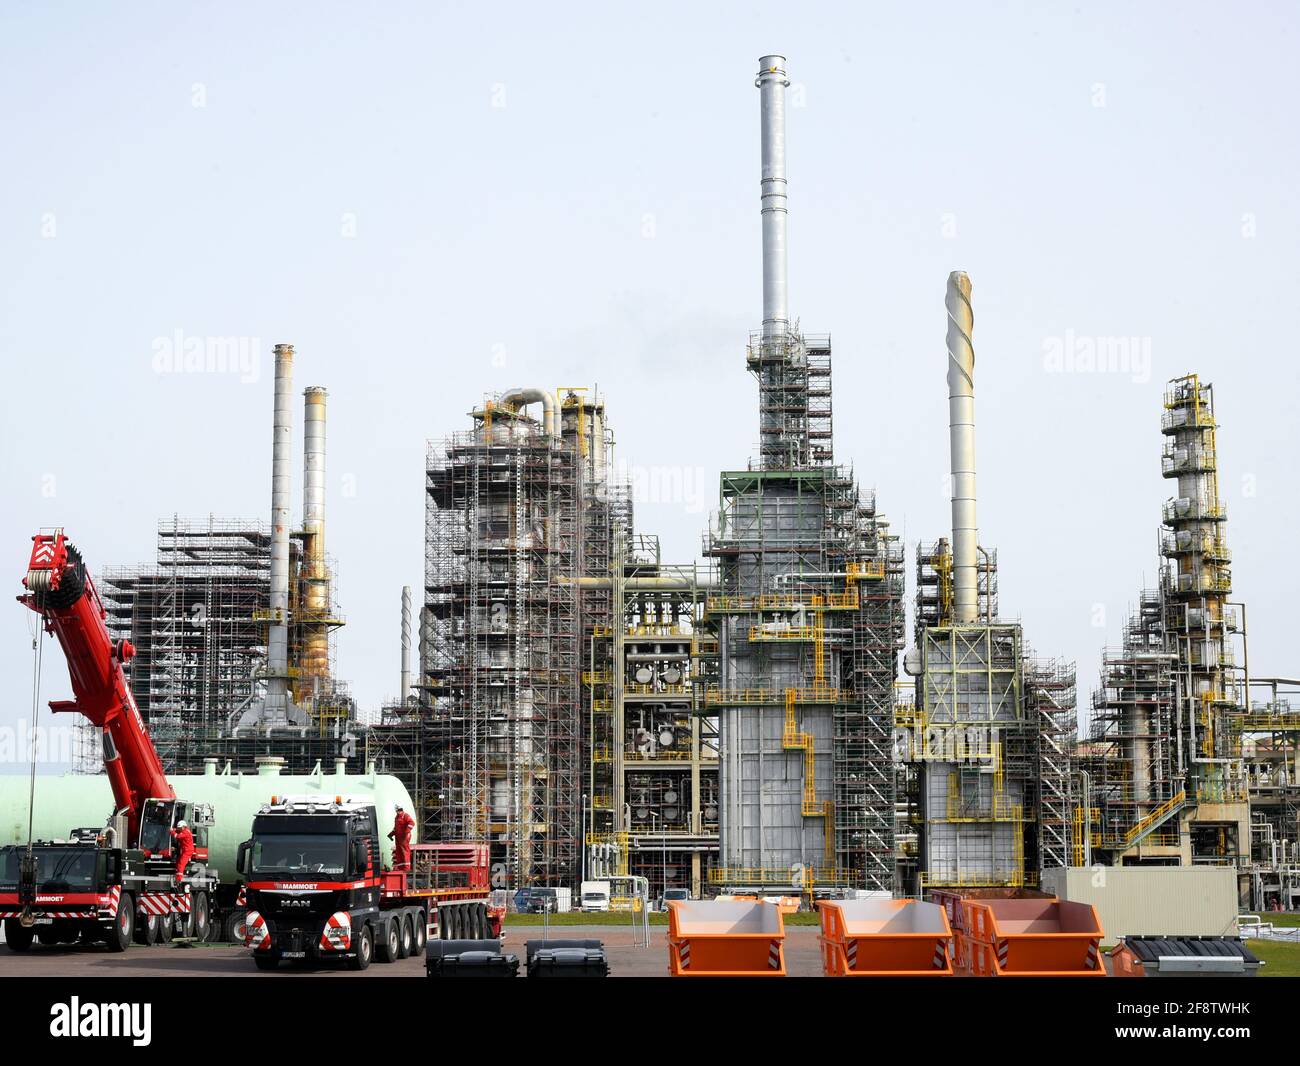 15 April 2021, Saxony-Anhalt, Leuna: At the TOTAL refinery in Leuna, construction vehicles stand in front of equipment and columns surrounded by scaffolding. Preparations are currently underway at one of the most modern refineries in Europe for a general inspection lasting several weeks, which is scheduled to begin at the beginning of May. The scheduled general maintenance with complete shutdown of the refinery, which belongs to the French oil company 'Total', was supposed to take place last year, but had to be postponed due to the first Corona wave. Total expects about 5000 additional workers Stock Photo